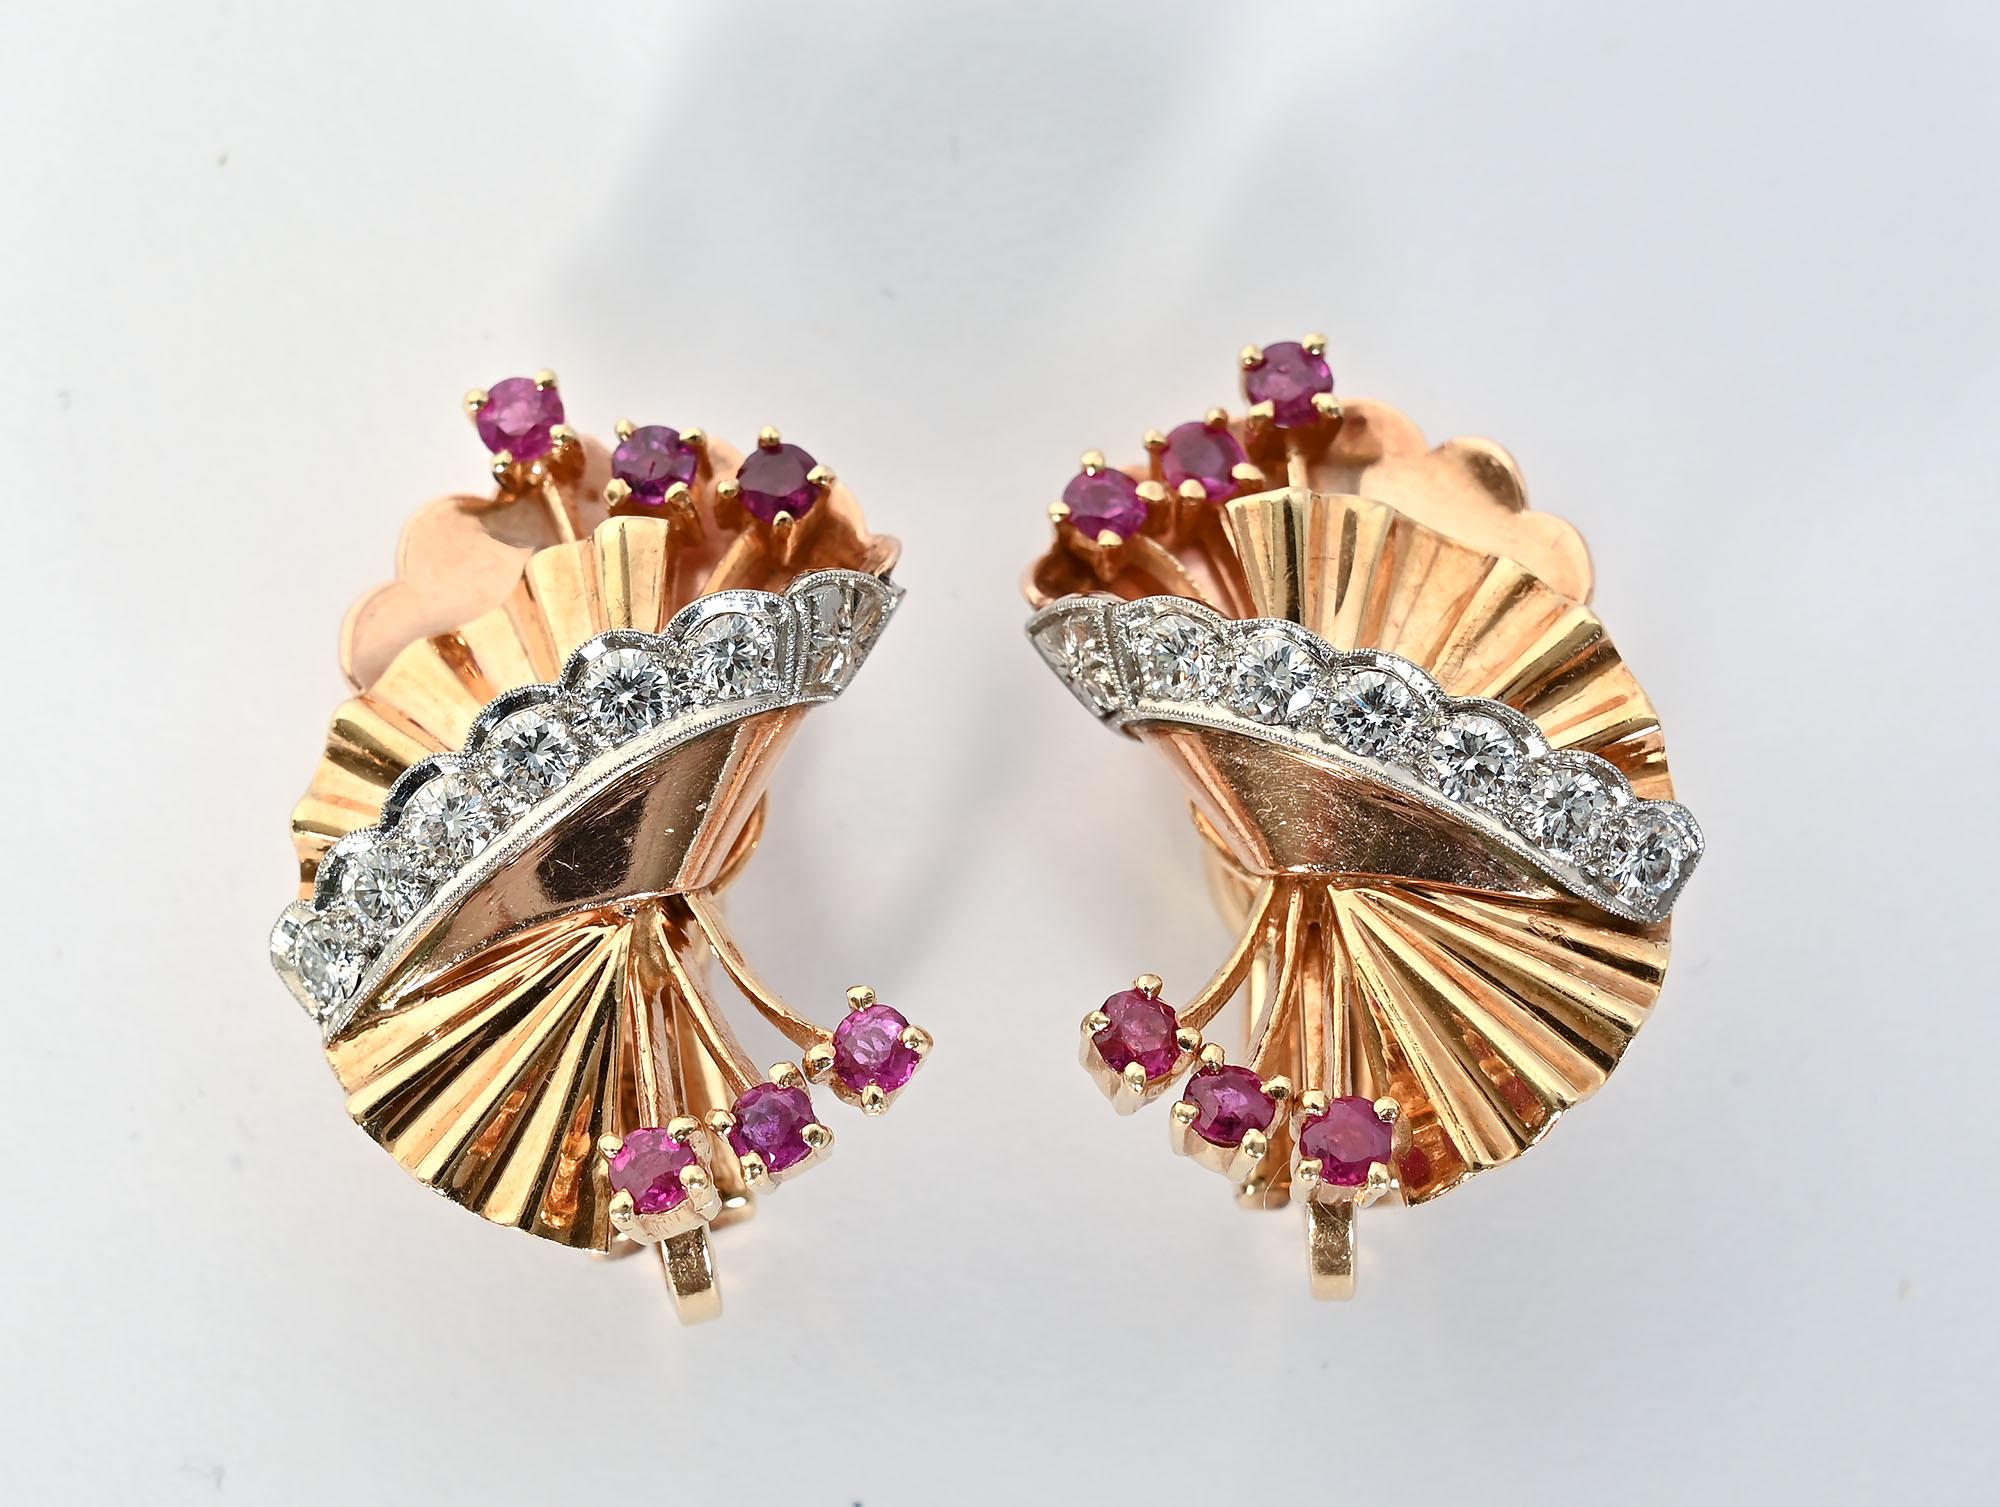 Brilliant Cut Retro Gold Earrings with Rubies and Diamonds